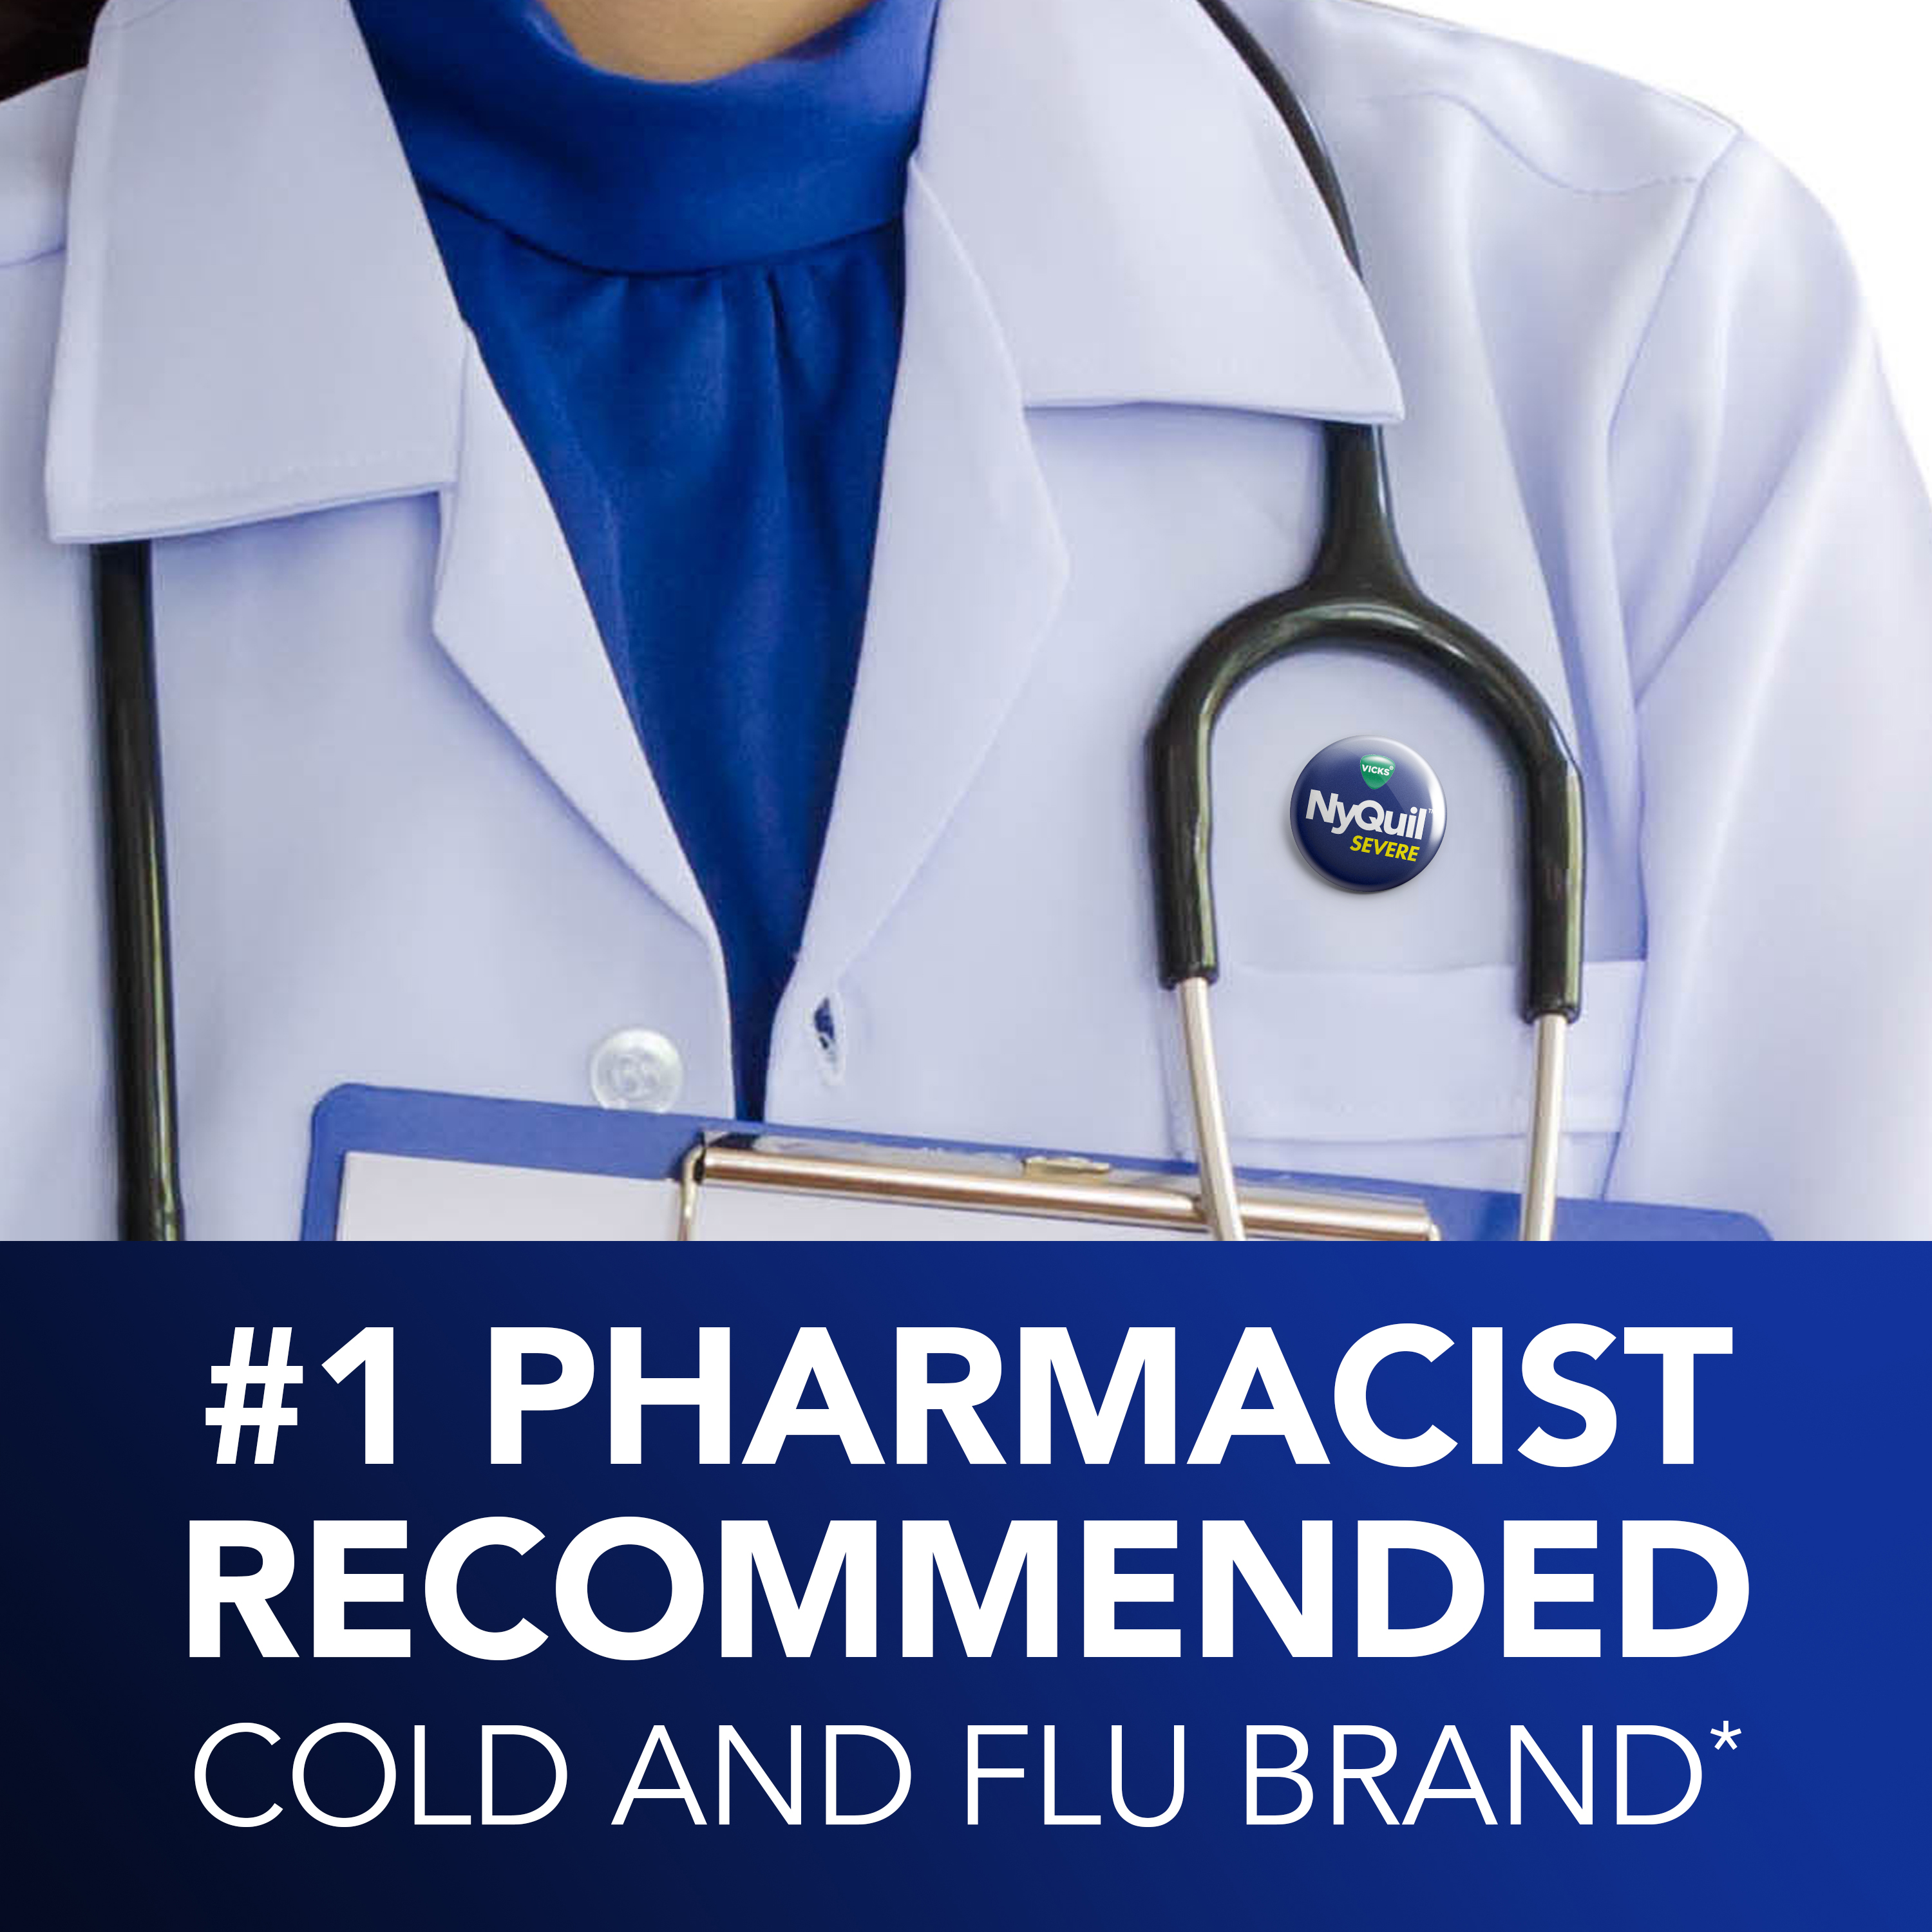 #1 Pharmacist recommended cold and flu brand*